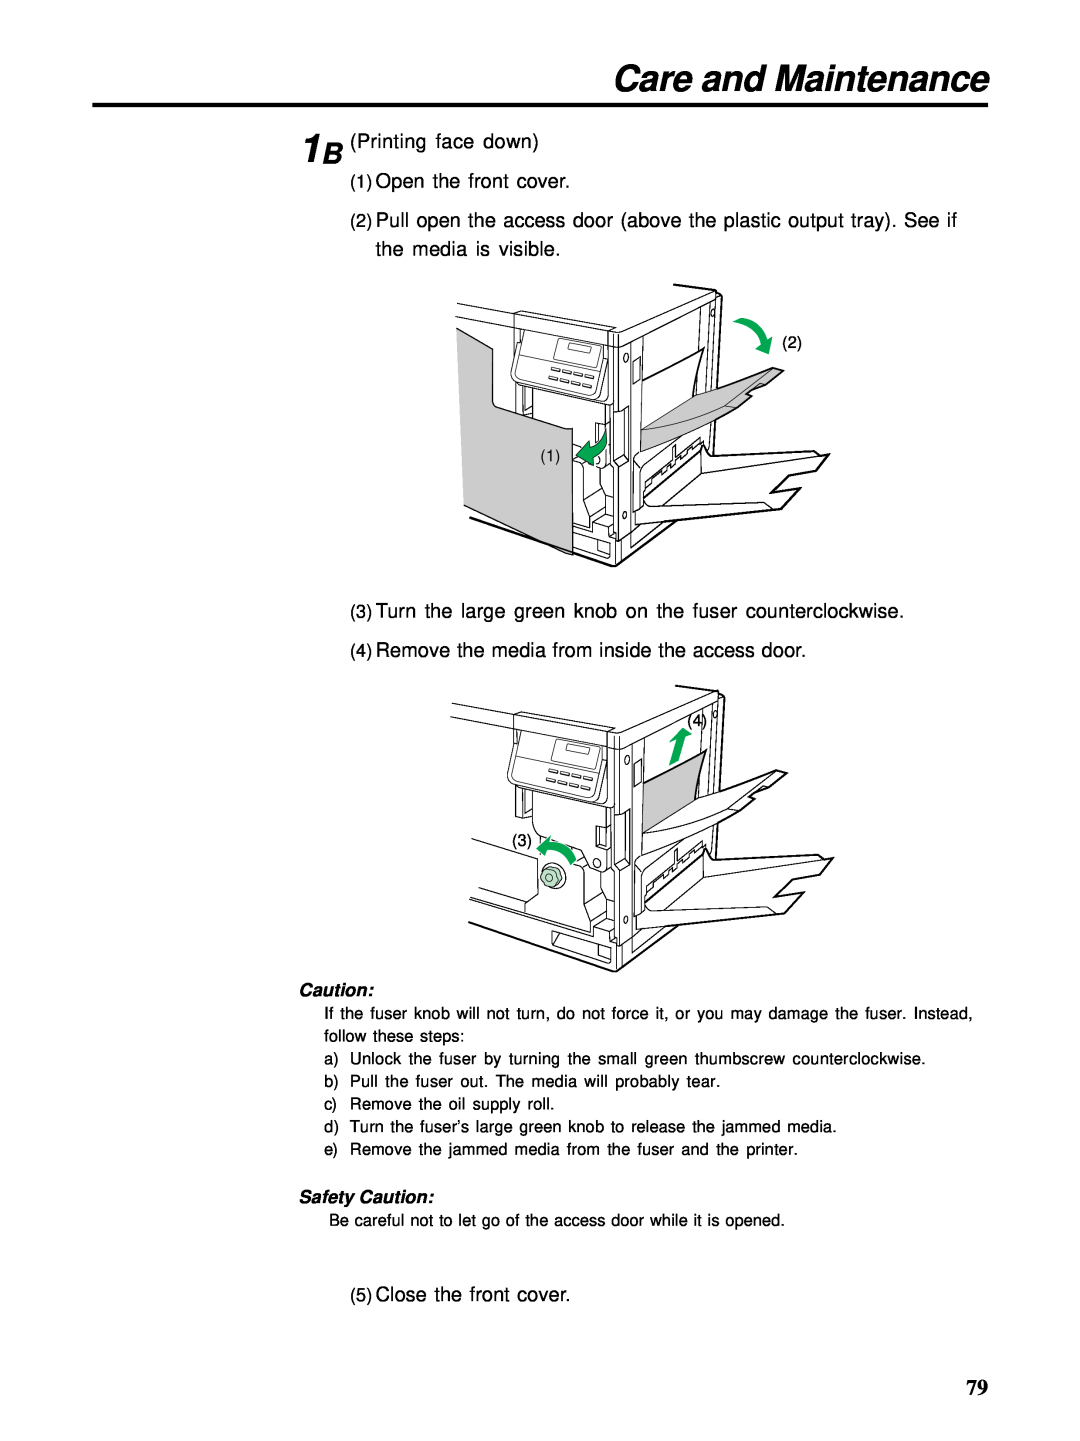 HP Ci 1100 manual Care and Maintenance, 1B Printing face down 1 Open the front cover 